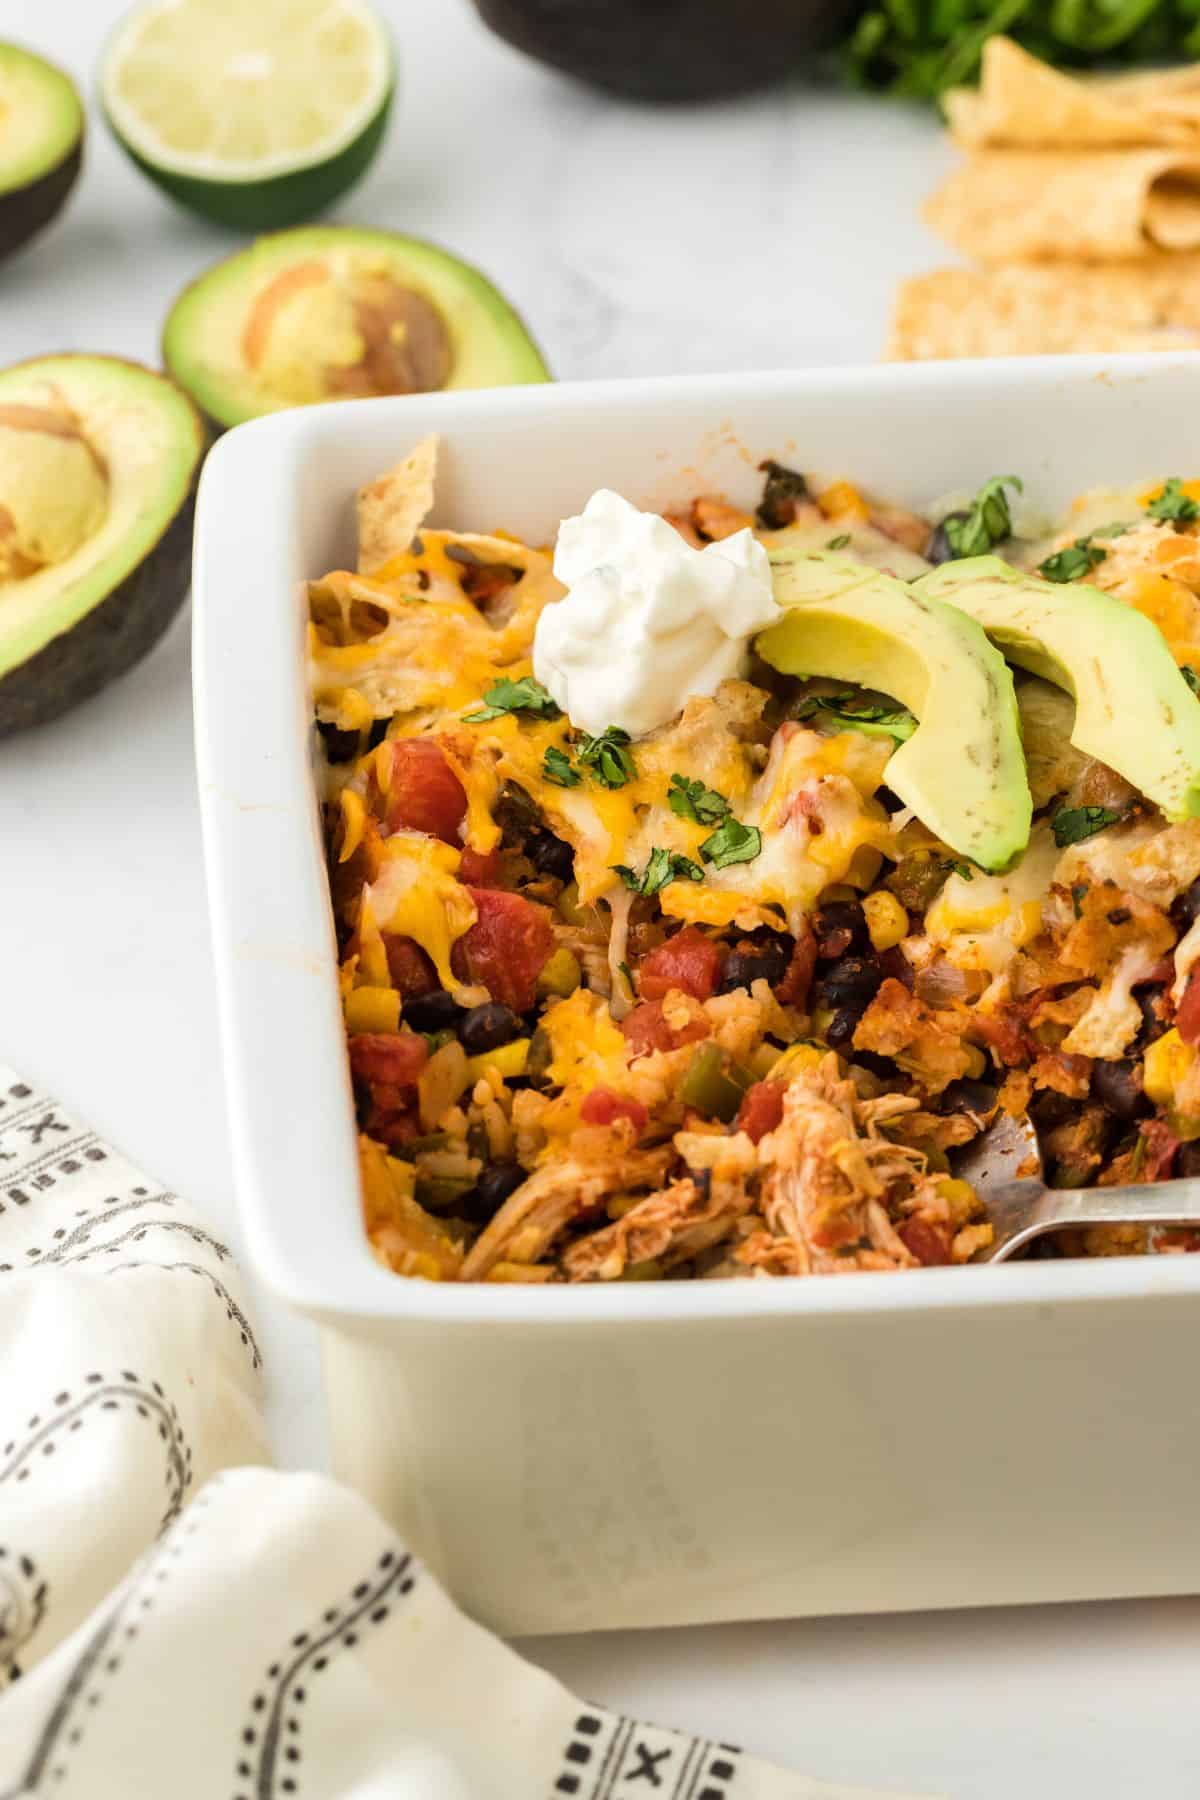 A white casserole dish filled with Southwestern chicken casserole, featuring layers of rice, beans, corn, shredded chicken, and melted cheese, garnished with avocado slices and sour cream. In the background there's avocados, tortilla chips and lime